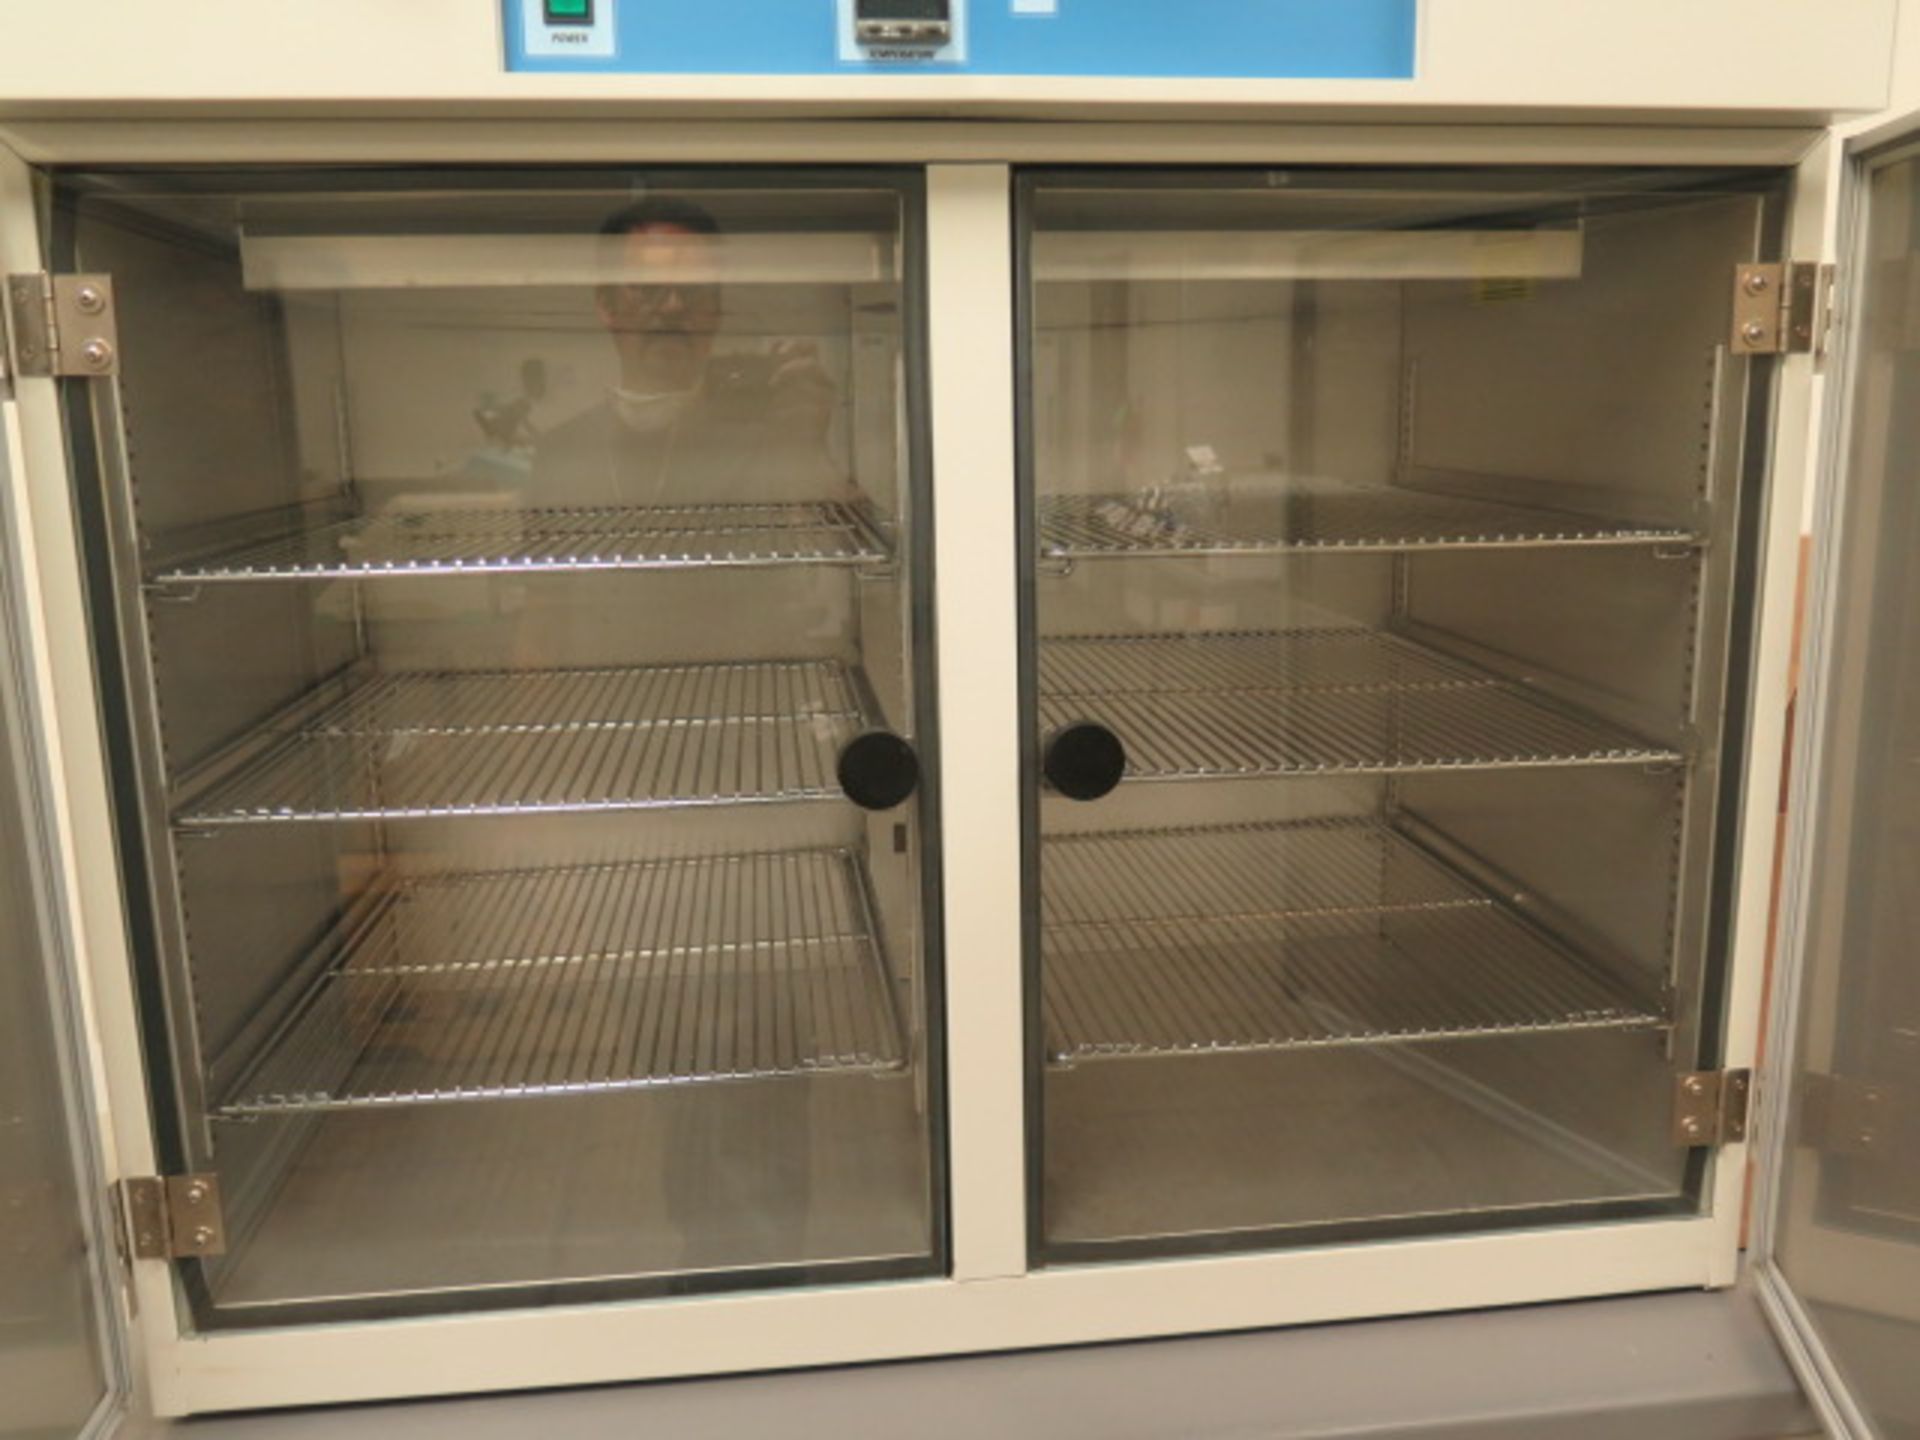 Thermo Scientifis mdl. 6878 Lab Oven s/n 612299-130 w/ Digital Temp Controller. SOLD AS IS - Image 3 of 5